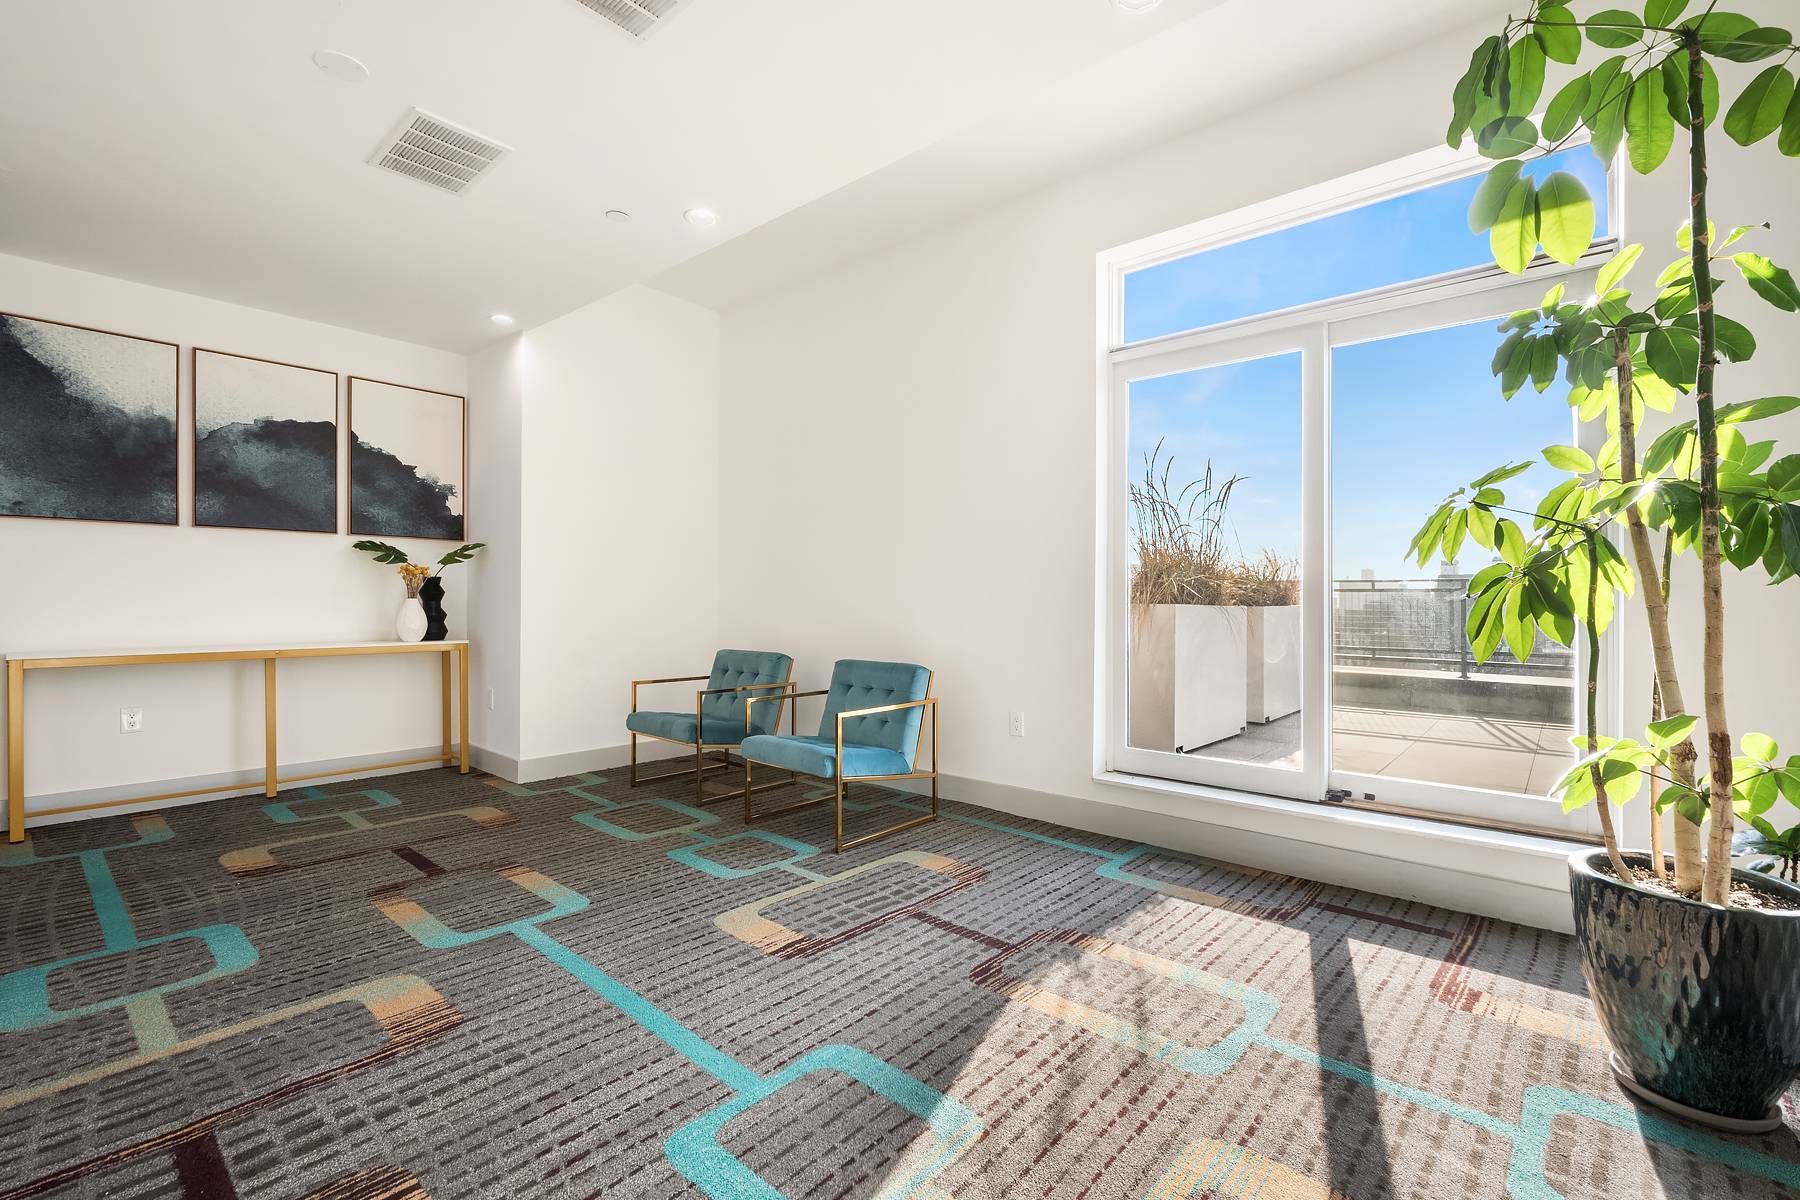 This spacious and bright one bedroom, one bathroom condominium welcomes you home with stunning designer finishes and great amenities, including onsite parking.